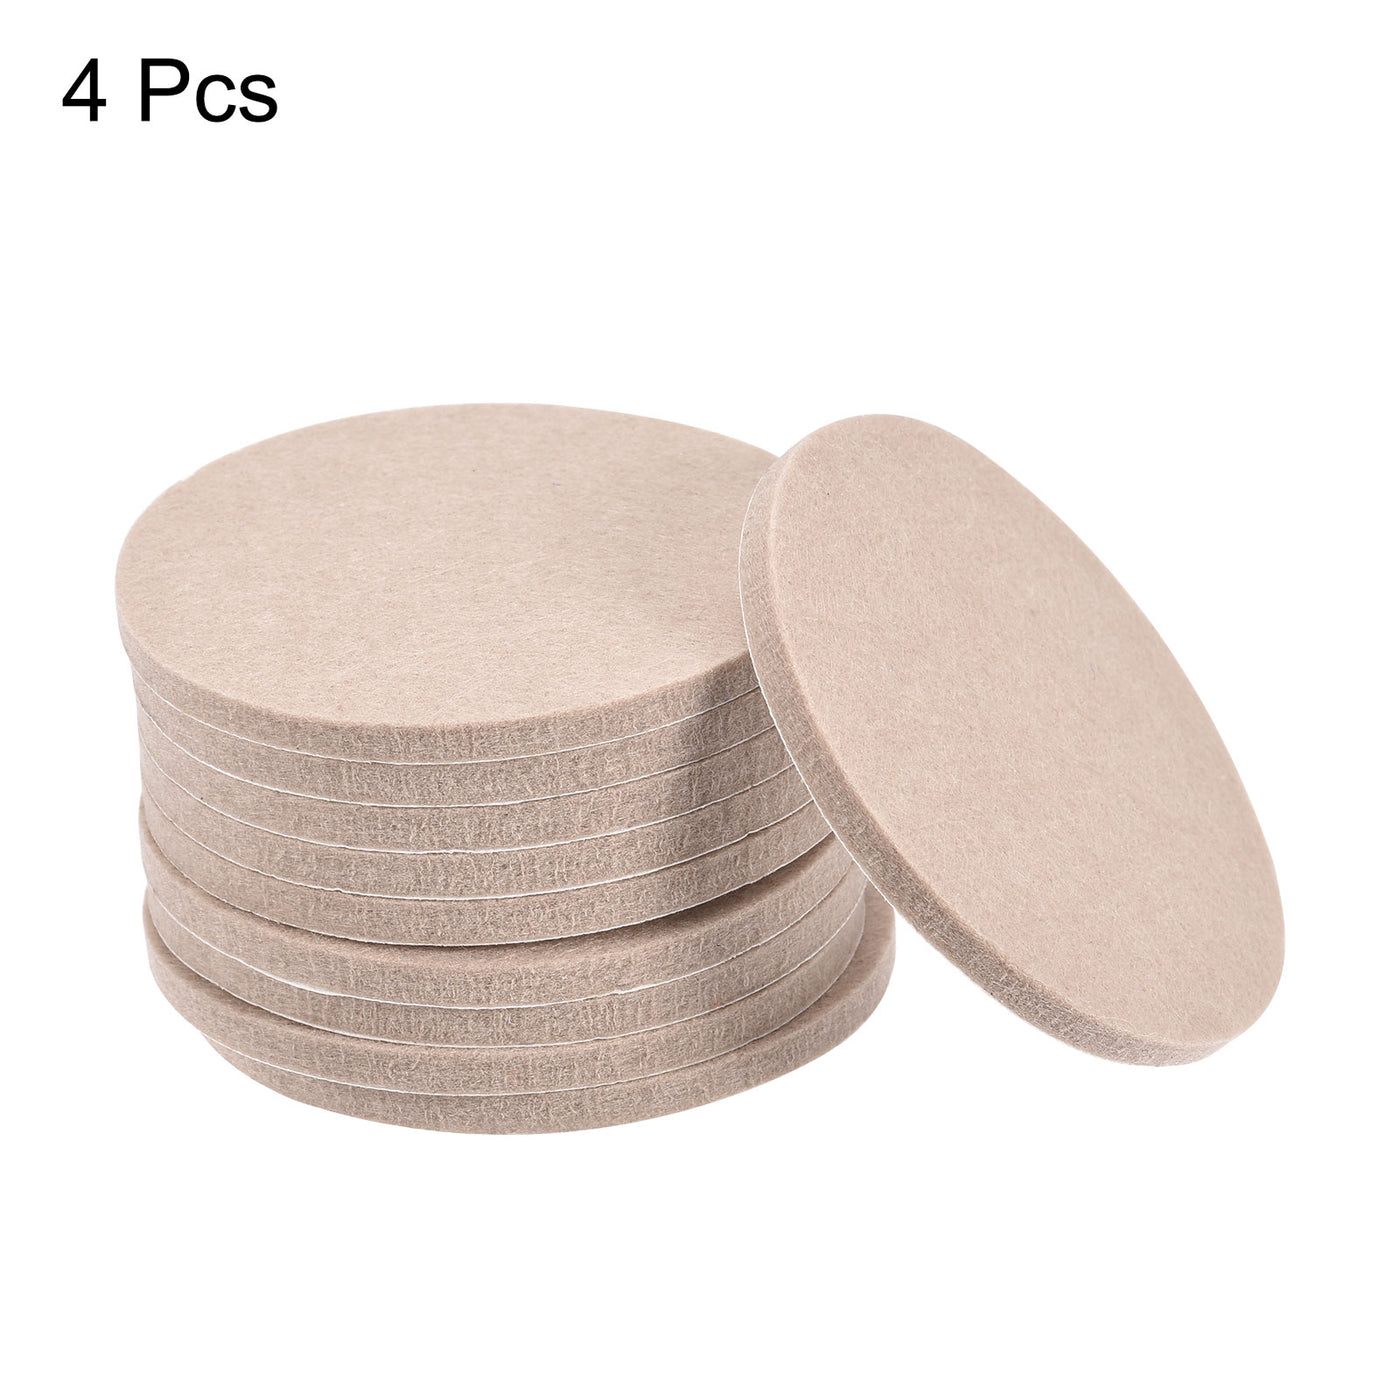 uxcell Uxcell Felt Furniture Pads, Self-stick Non-slip Anti-scratch Round Felt Pads for Furniture Feet and Other Home Furniture